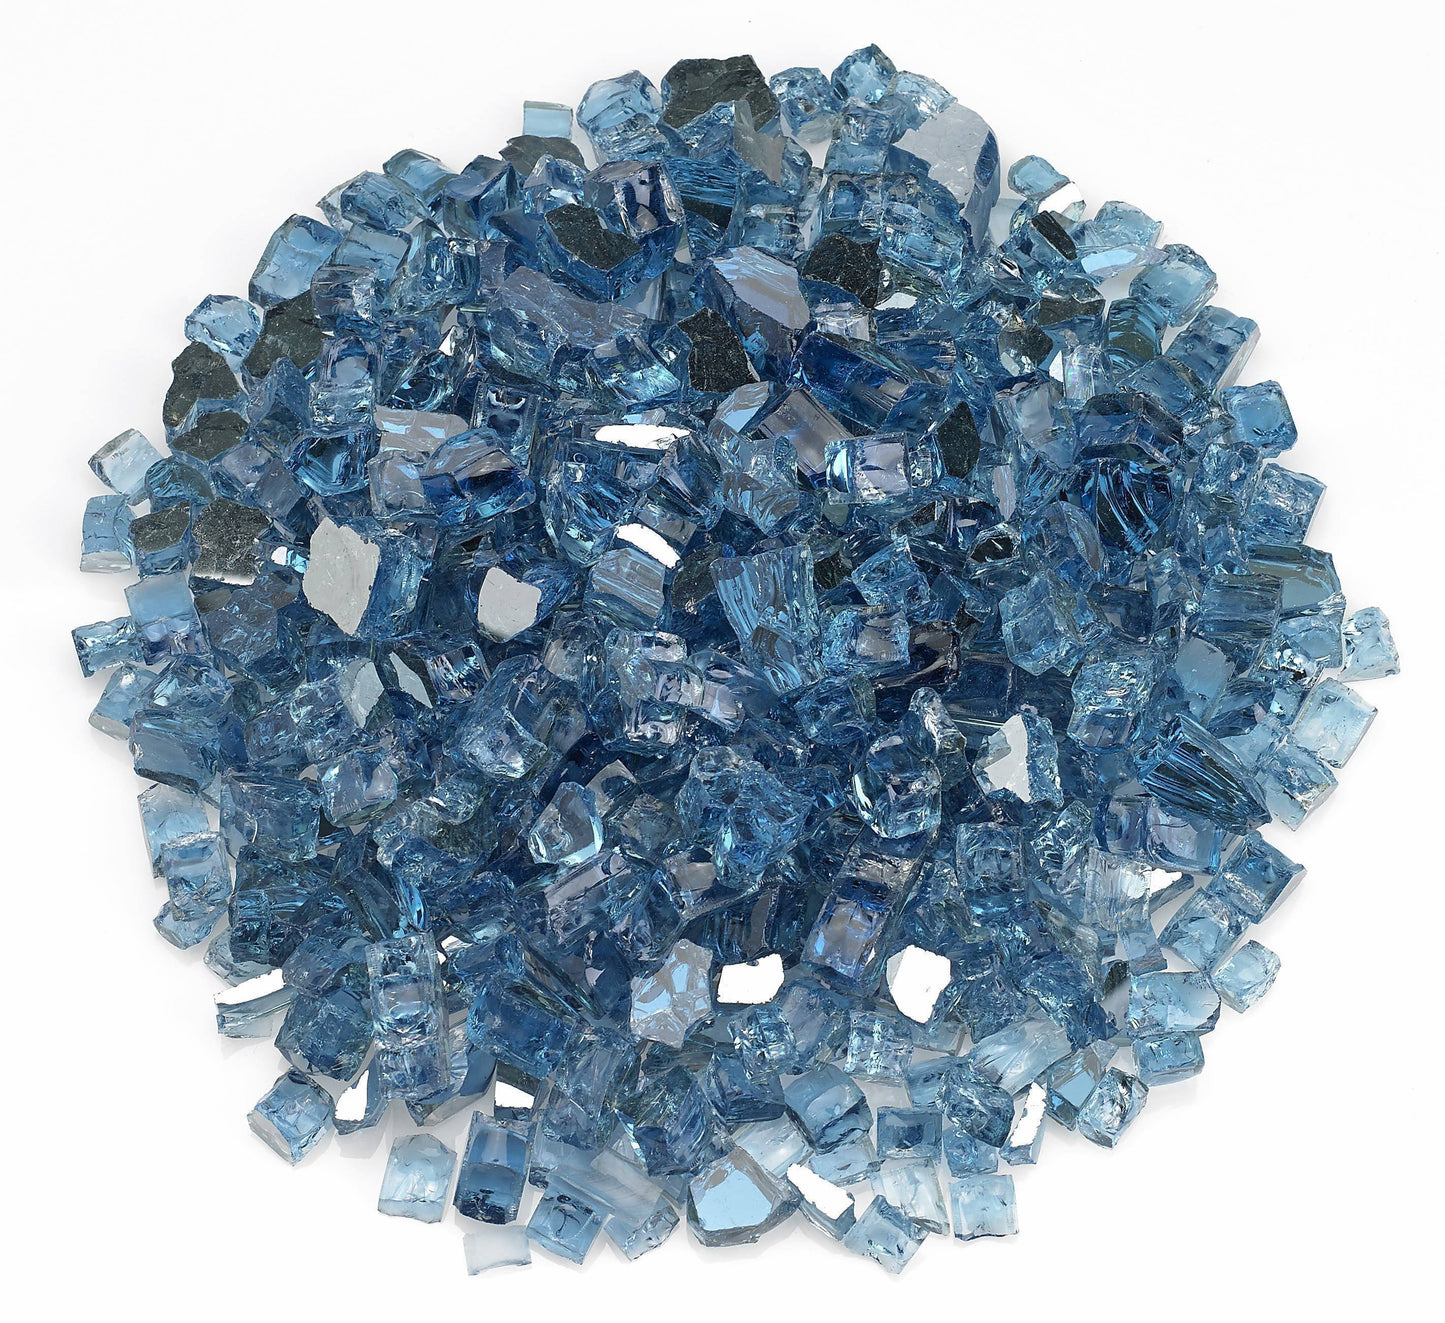 Fire by Design Reflective Collection 1/2" Pacific Blue Reflective Fire Glass - (10lb Bag)